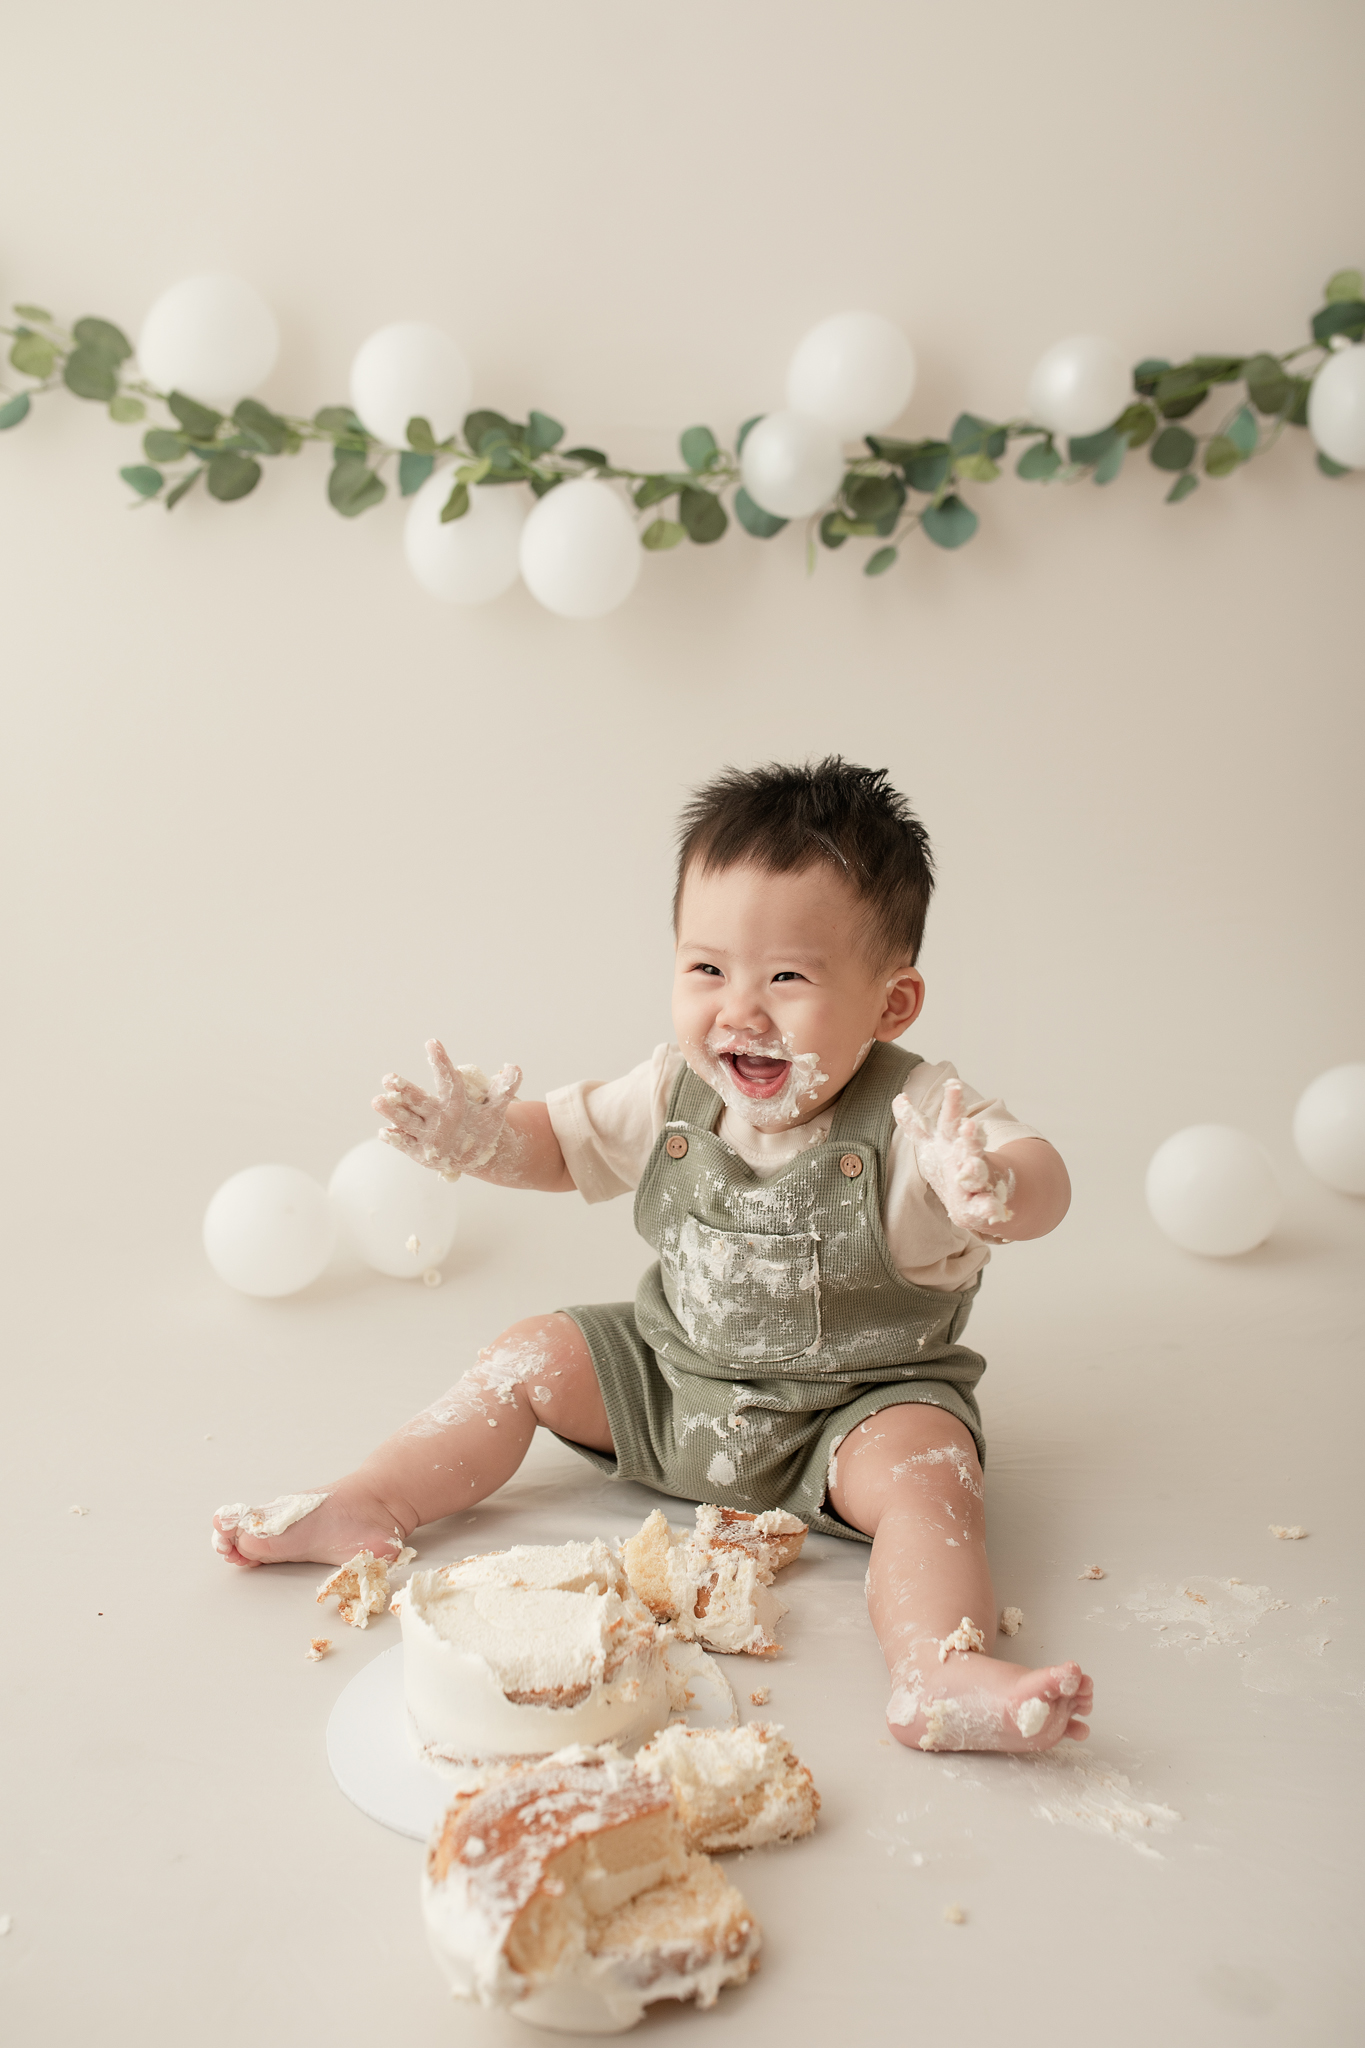 asian baby boy excited smashing a cake in photo studio